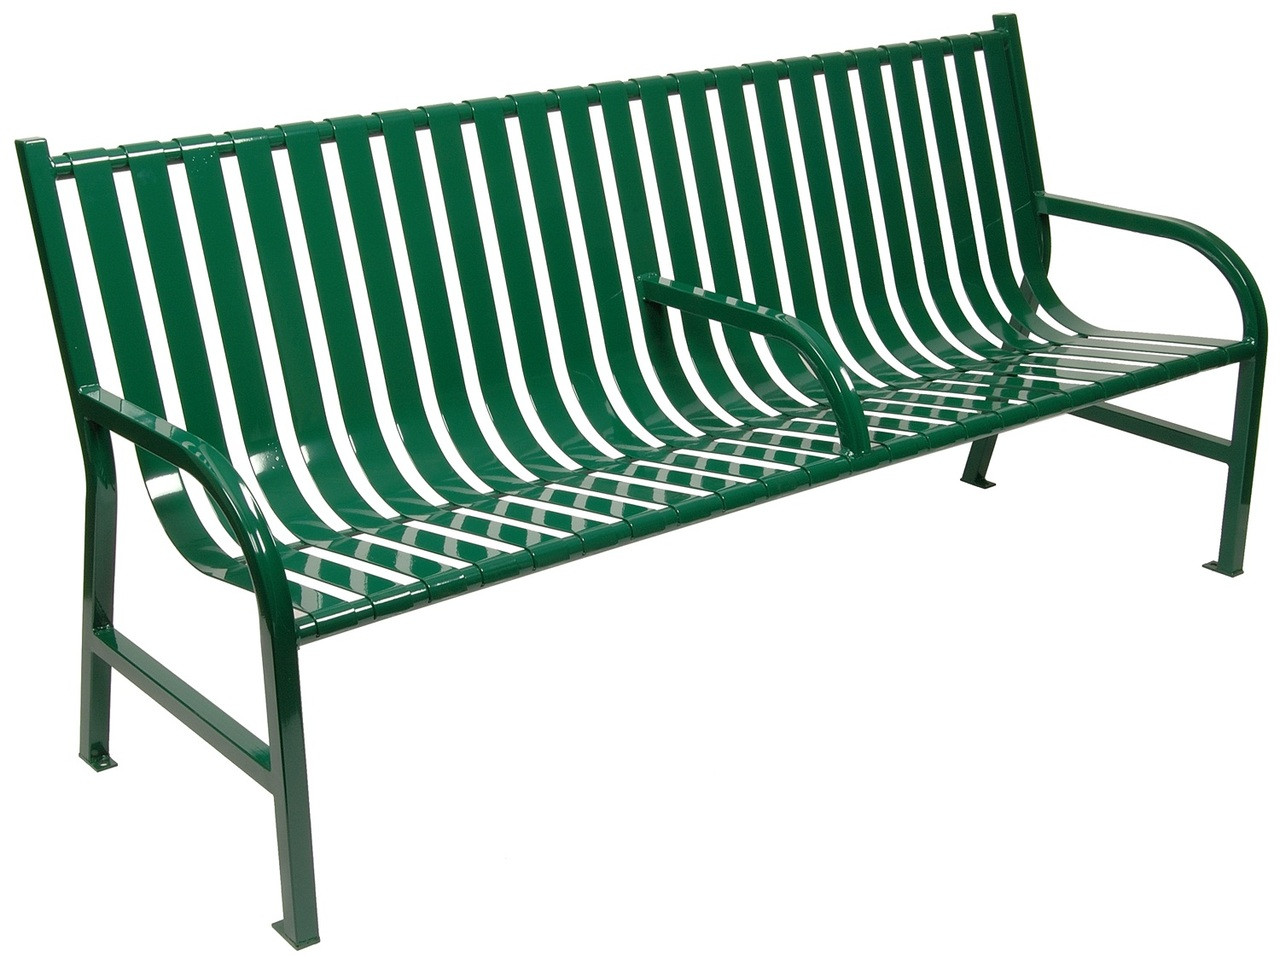 6 Foot Oakley Outdoor Slatted Bench with Center Arm M6-BCH-ARM